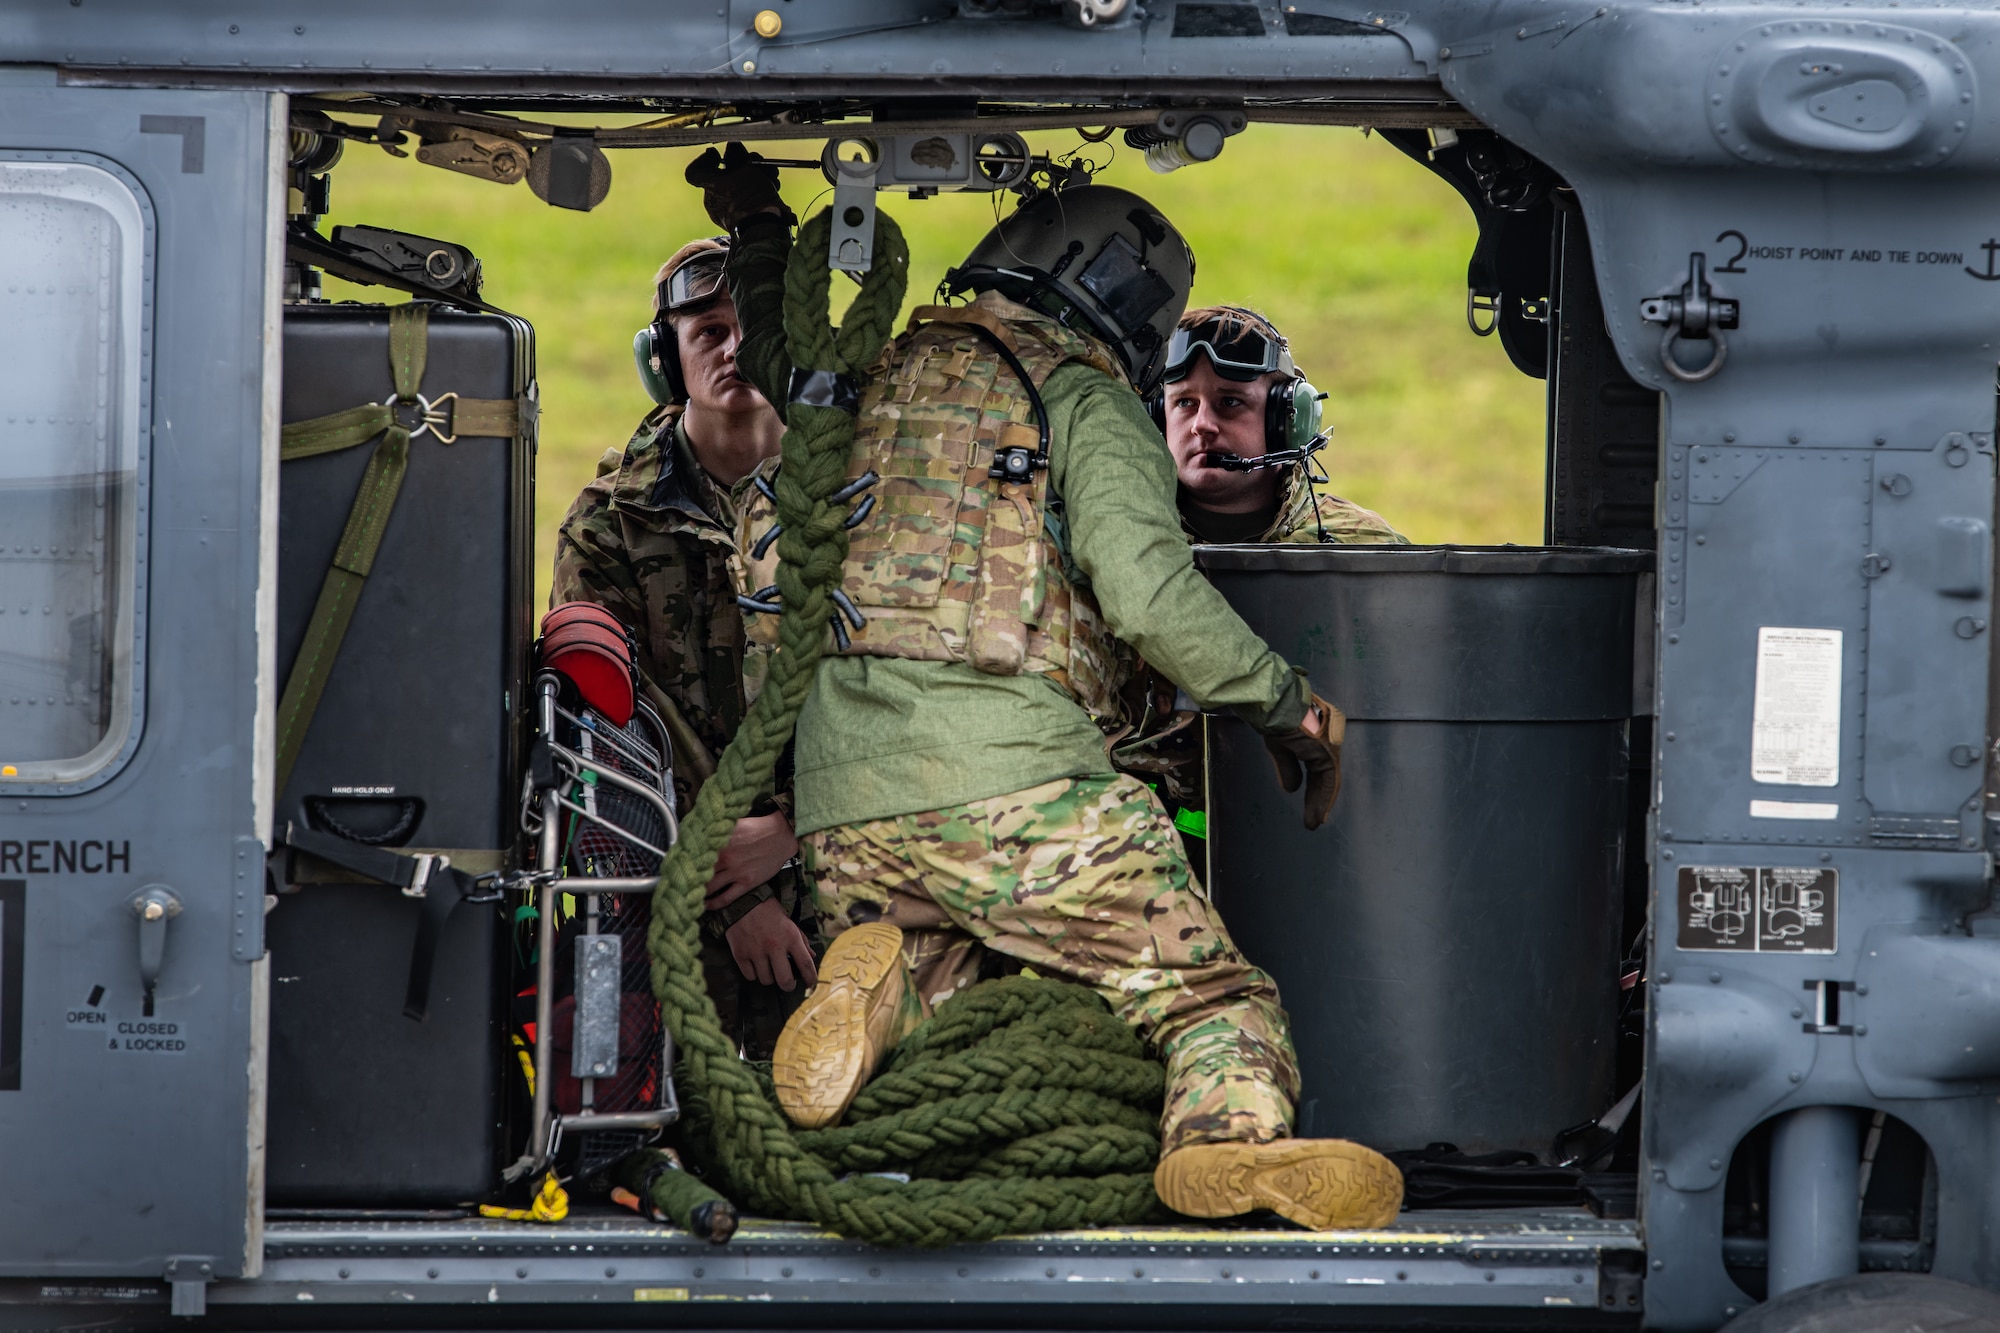 Three U.S. Air Force members prepare a helicopter for flight